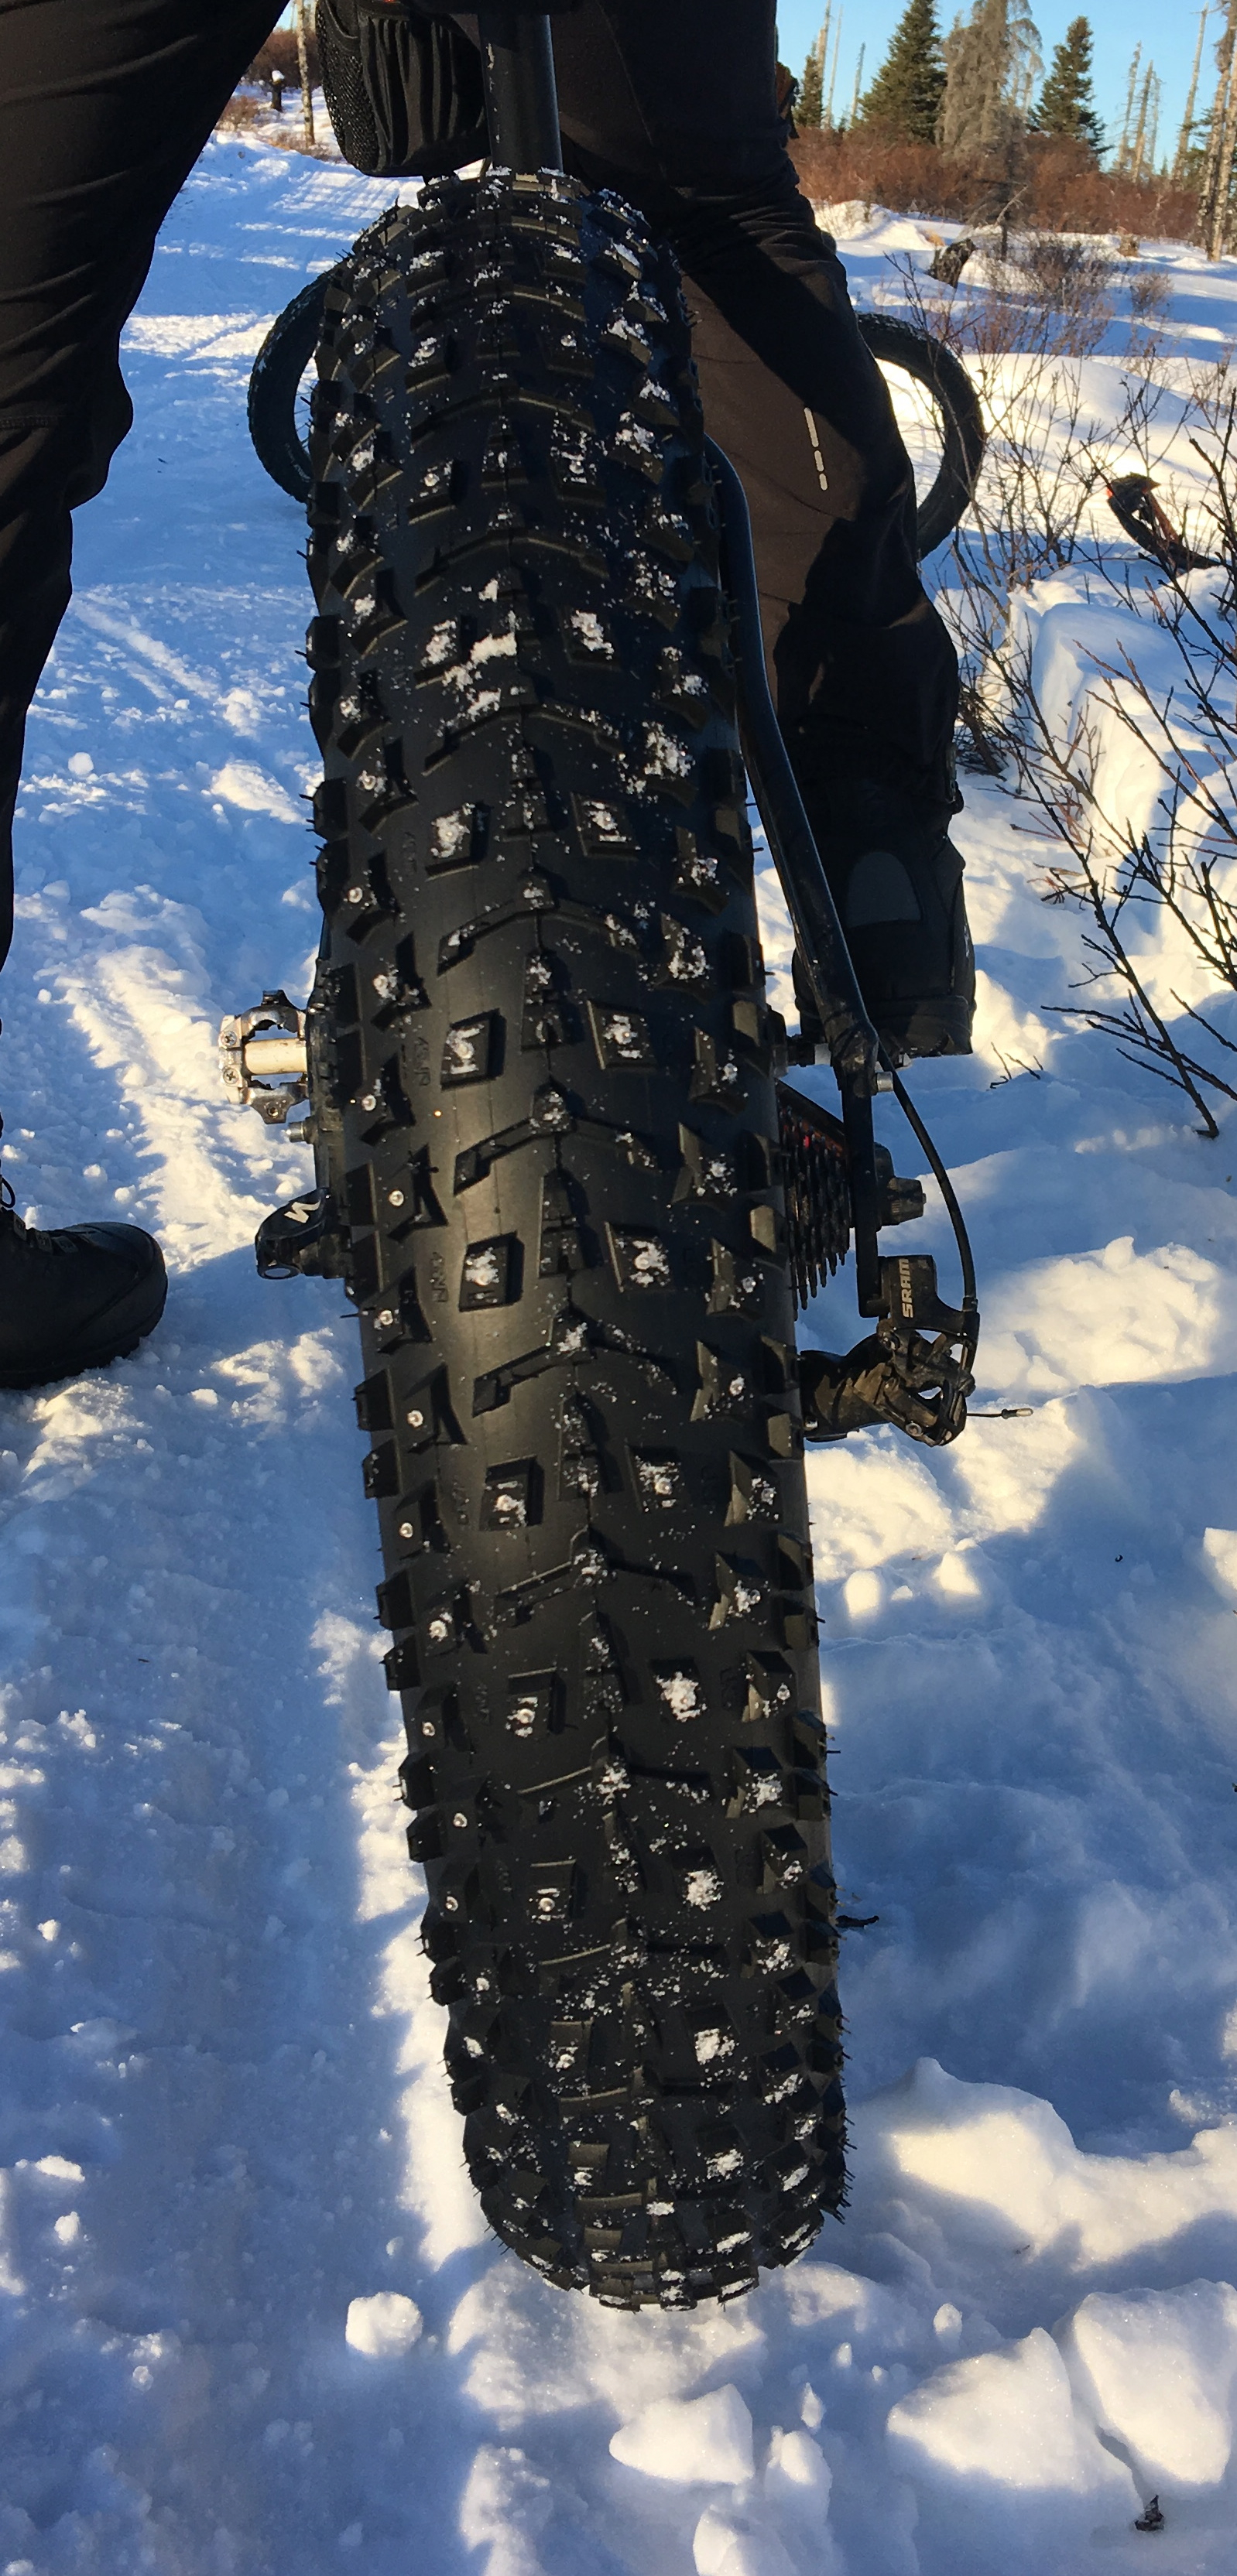 The oversized tires on fat-tire bikes provide traction in soft conditions. Some, like the tire pictured here, include studs for icy trails. (Photo by Will Morrow/Peninsula Clarion)